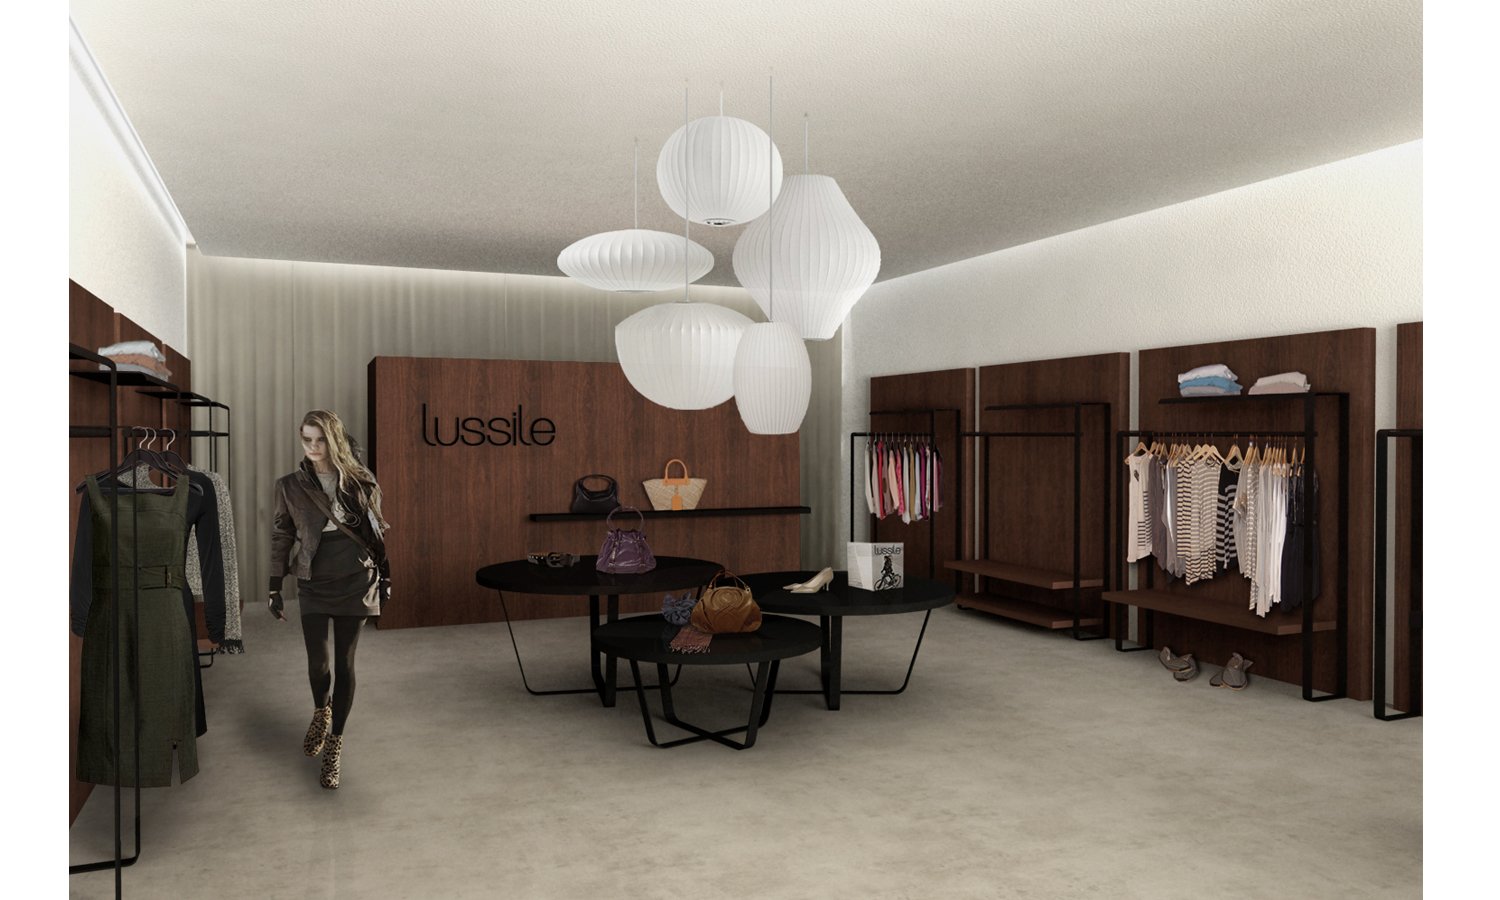 2011_concept retail lussile 02.jpg